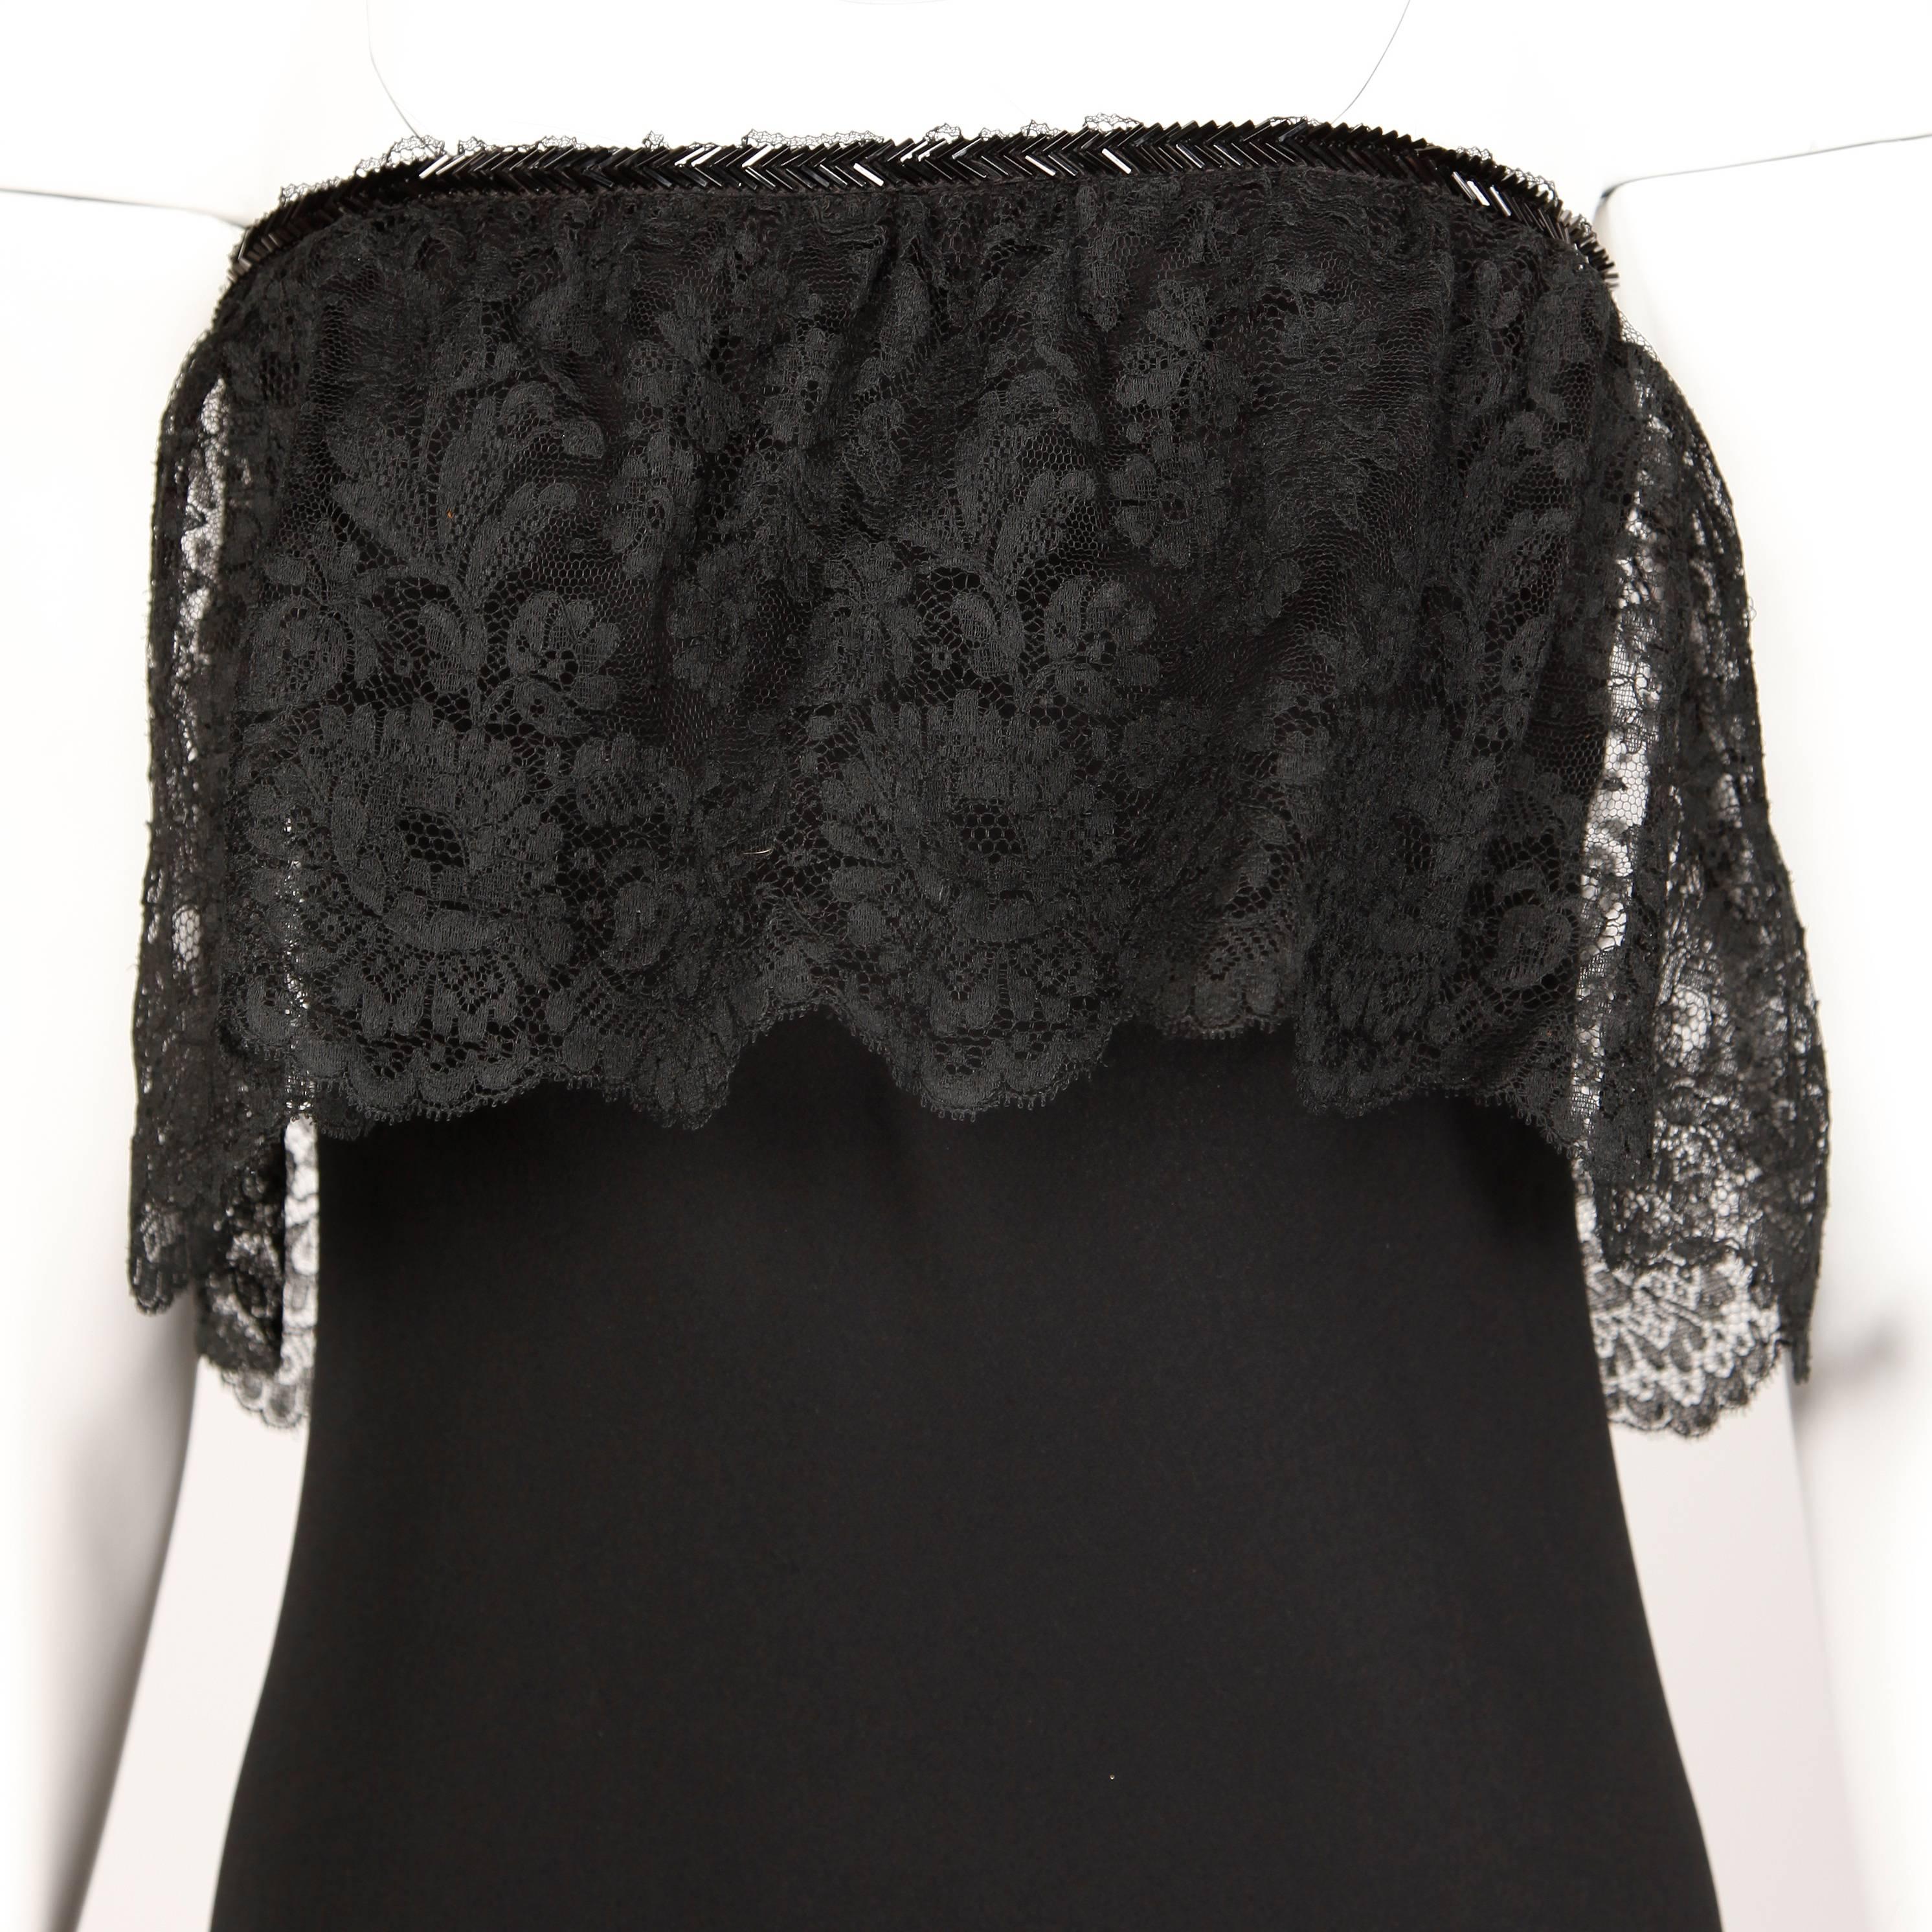 Stavropoulos 1970s Vintage Black Beaded Silk Lace Dress + Wrap 2-Piece Ensemble In Excellent Condition For Sale In Sparks, NV